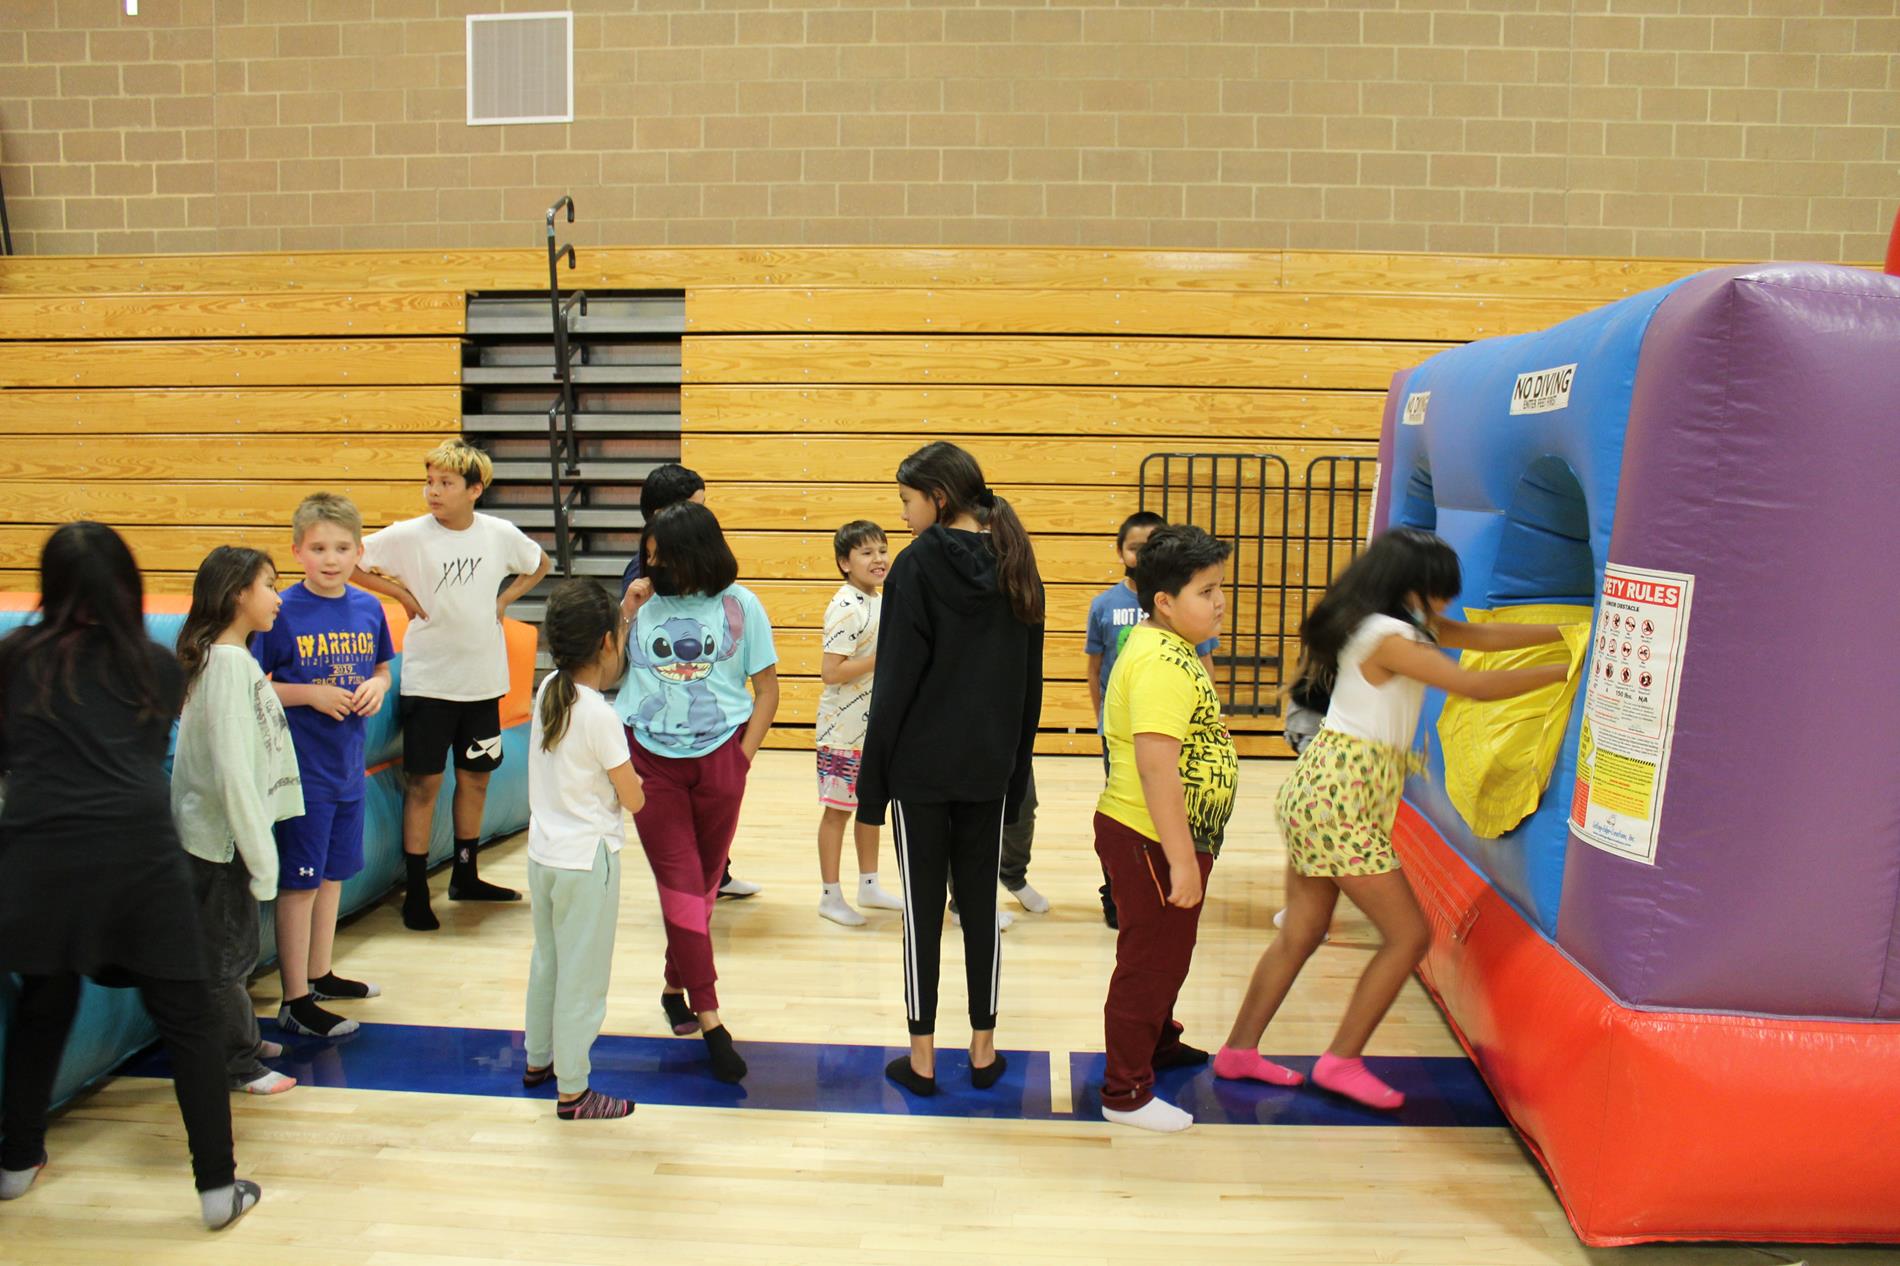 Students lining up for the inflatable obstacle course